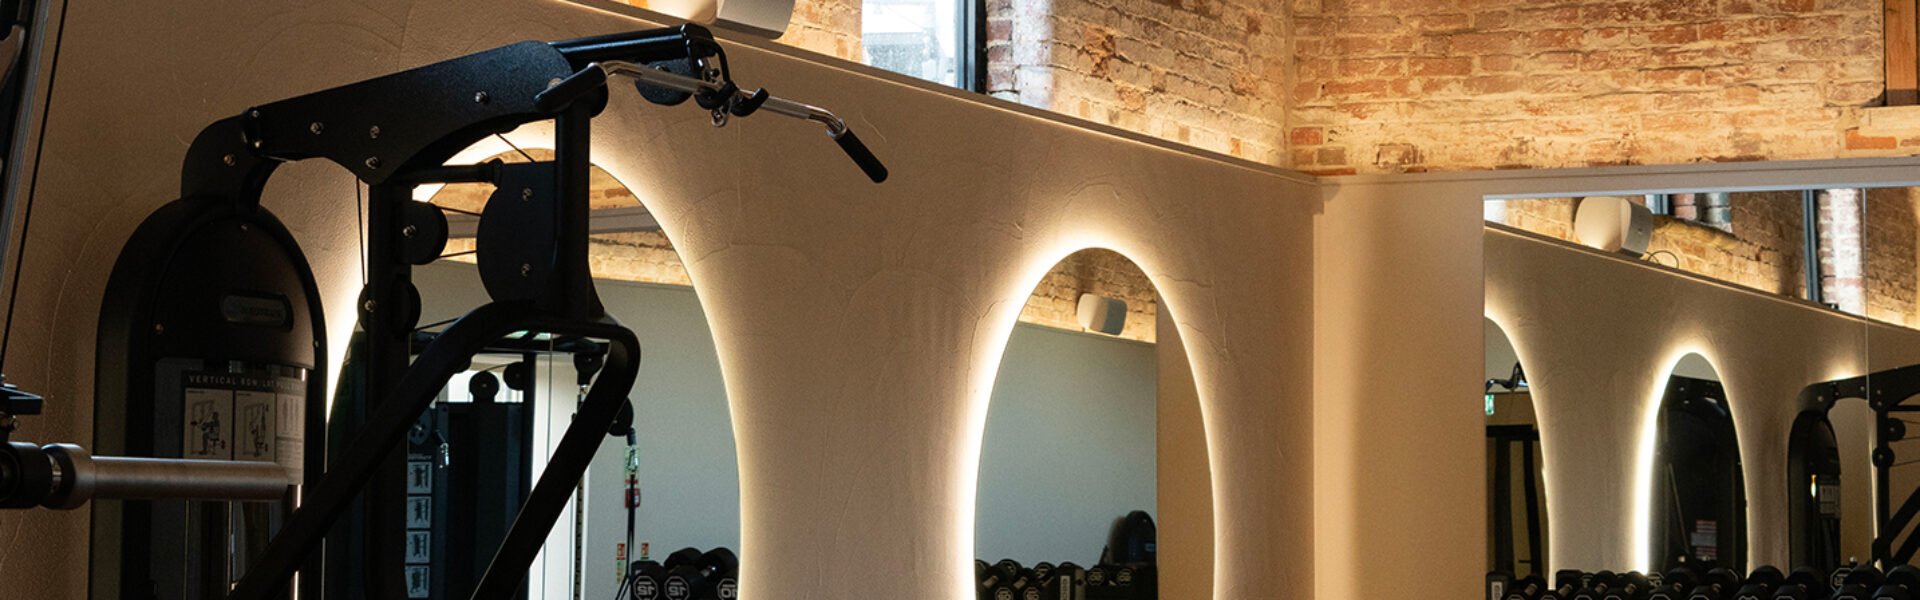 The Woolfox in Leicestershire know that lighting a commercial space can make or break the scheme. Featured here are mirrors in a gym that form part of the lighting scheme design created by Fritz Fryer